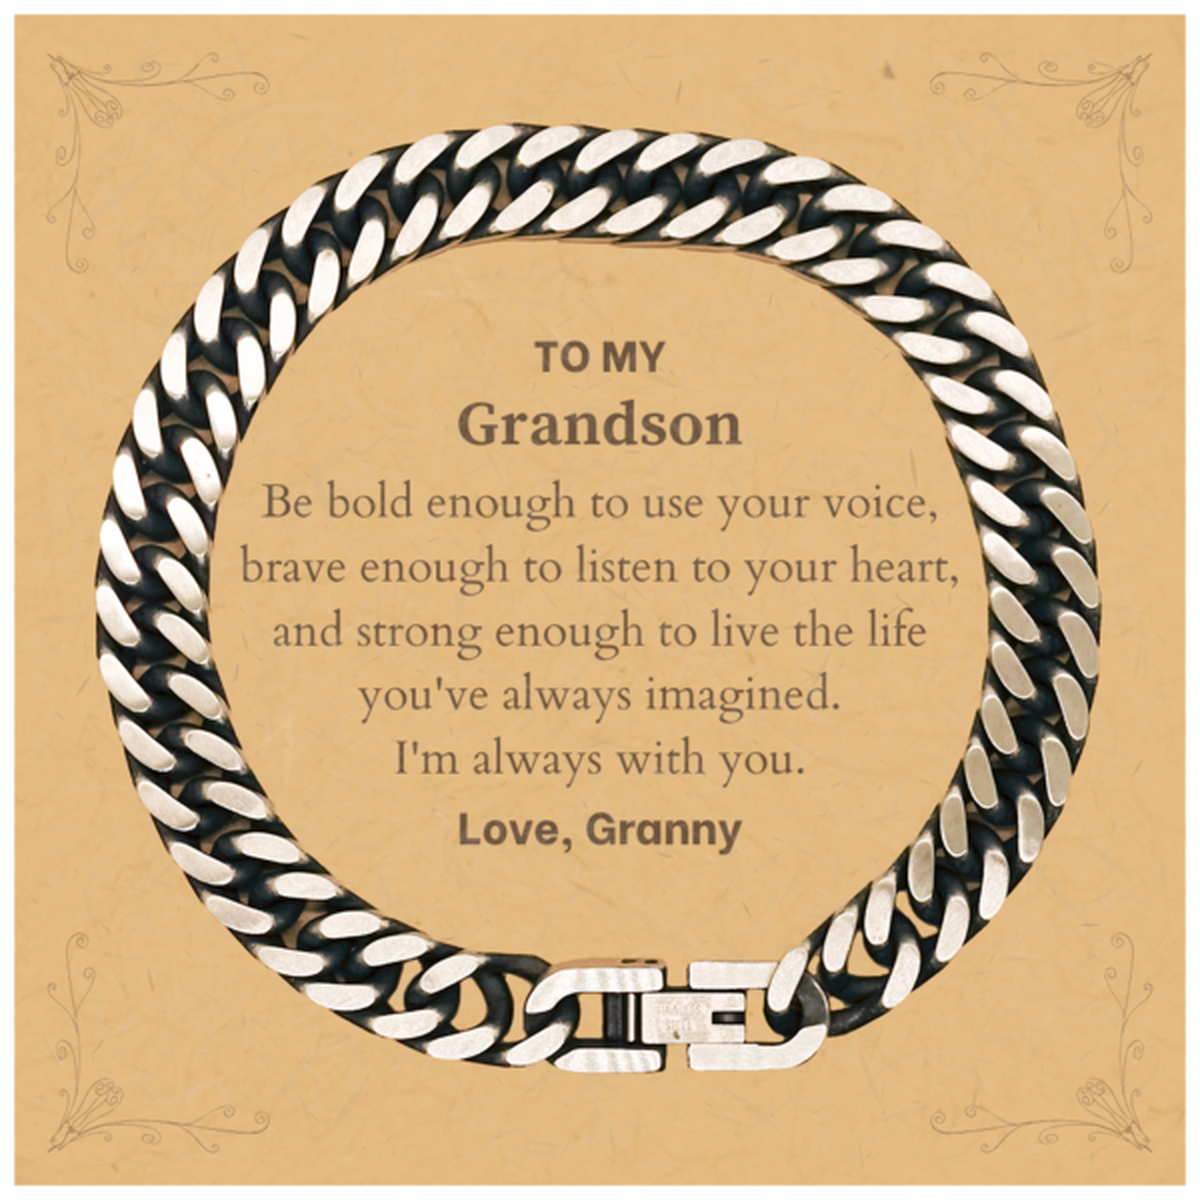 Keepsake Grandson Cuban Link Chain Bracelet Gift Idea Graduation Christmas Birthday Grandson from Granny, Grandson Be bold enough to use your voice, brave enough to listen to your heart. Love, Granny